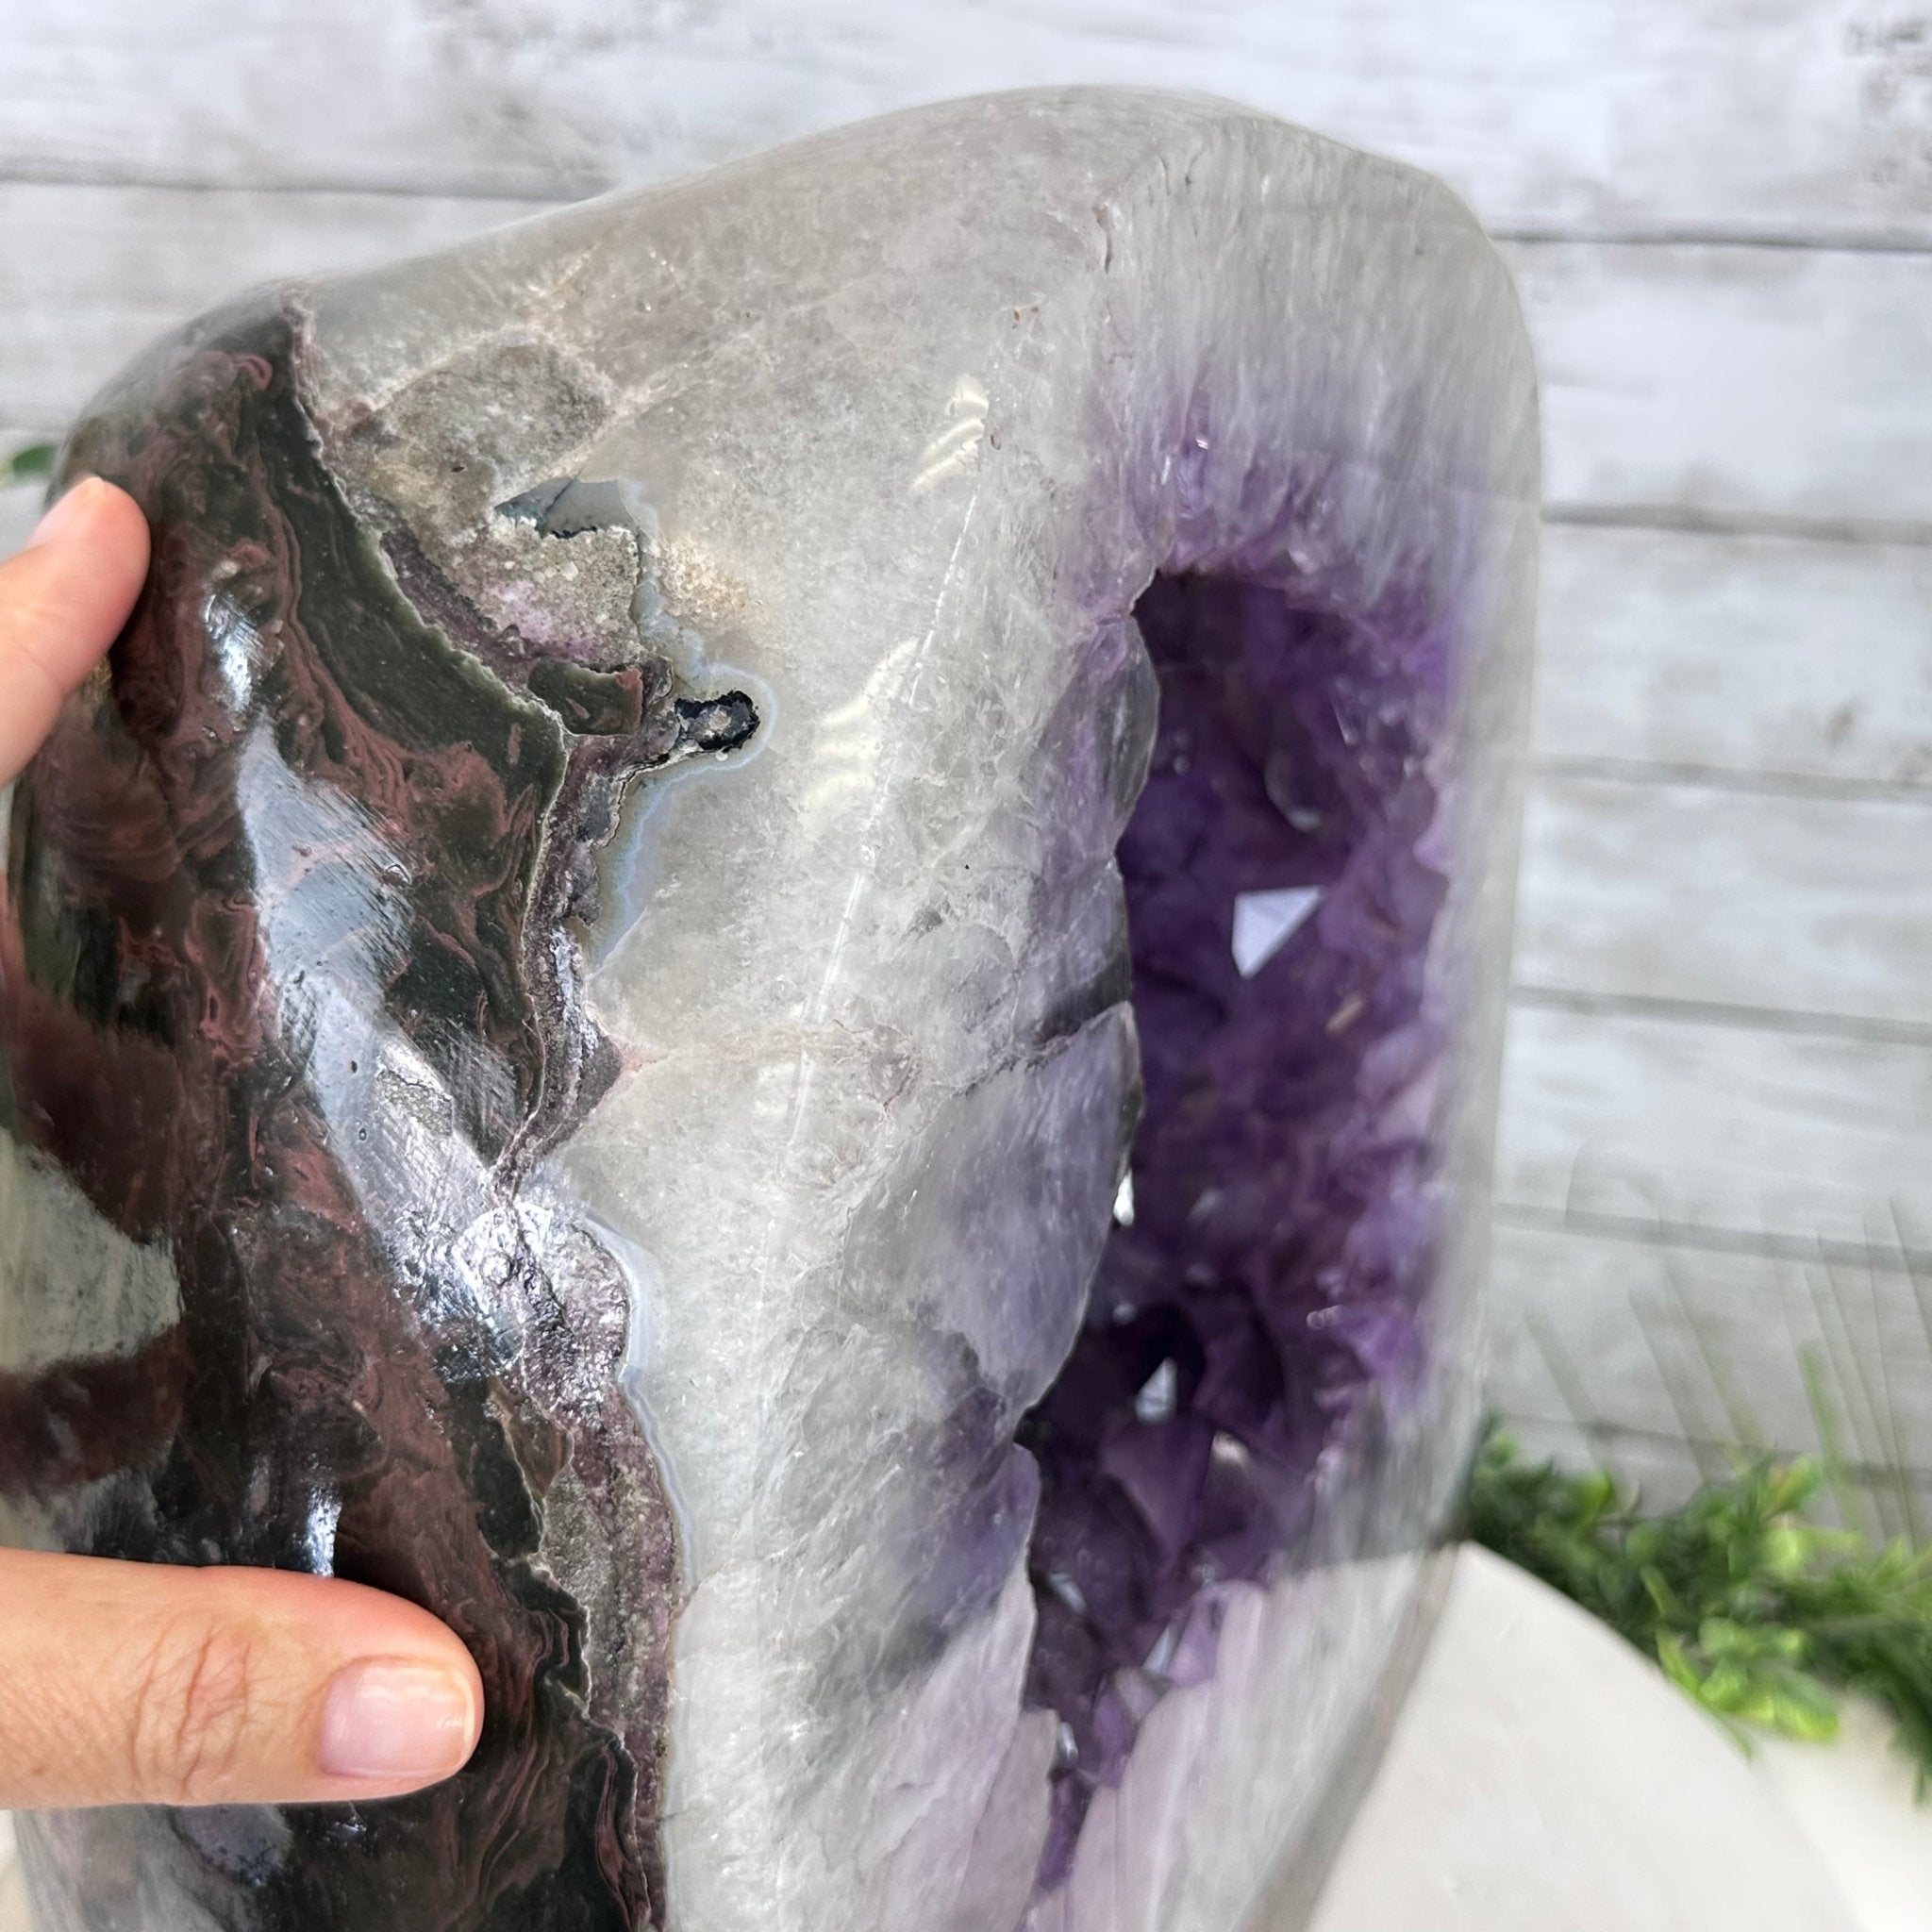 Extra Quality Polished Brazilian Amethyst Cathedral, 70.1 lbs & 13.5" tall Model #5602-0016 by Brazil Gems - Brazil GemsBrazil GemsExtra Quality Polished Brazilian Amethyst Cathedral, 70.1 lbs & 13.5" tall Model #5602-0016 by Brazil GemsPolished Cathedrals5602-0016